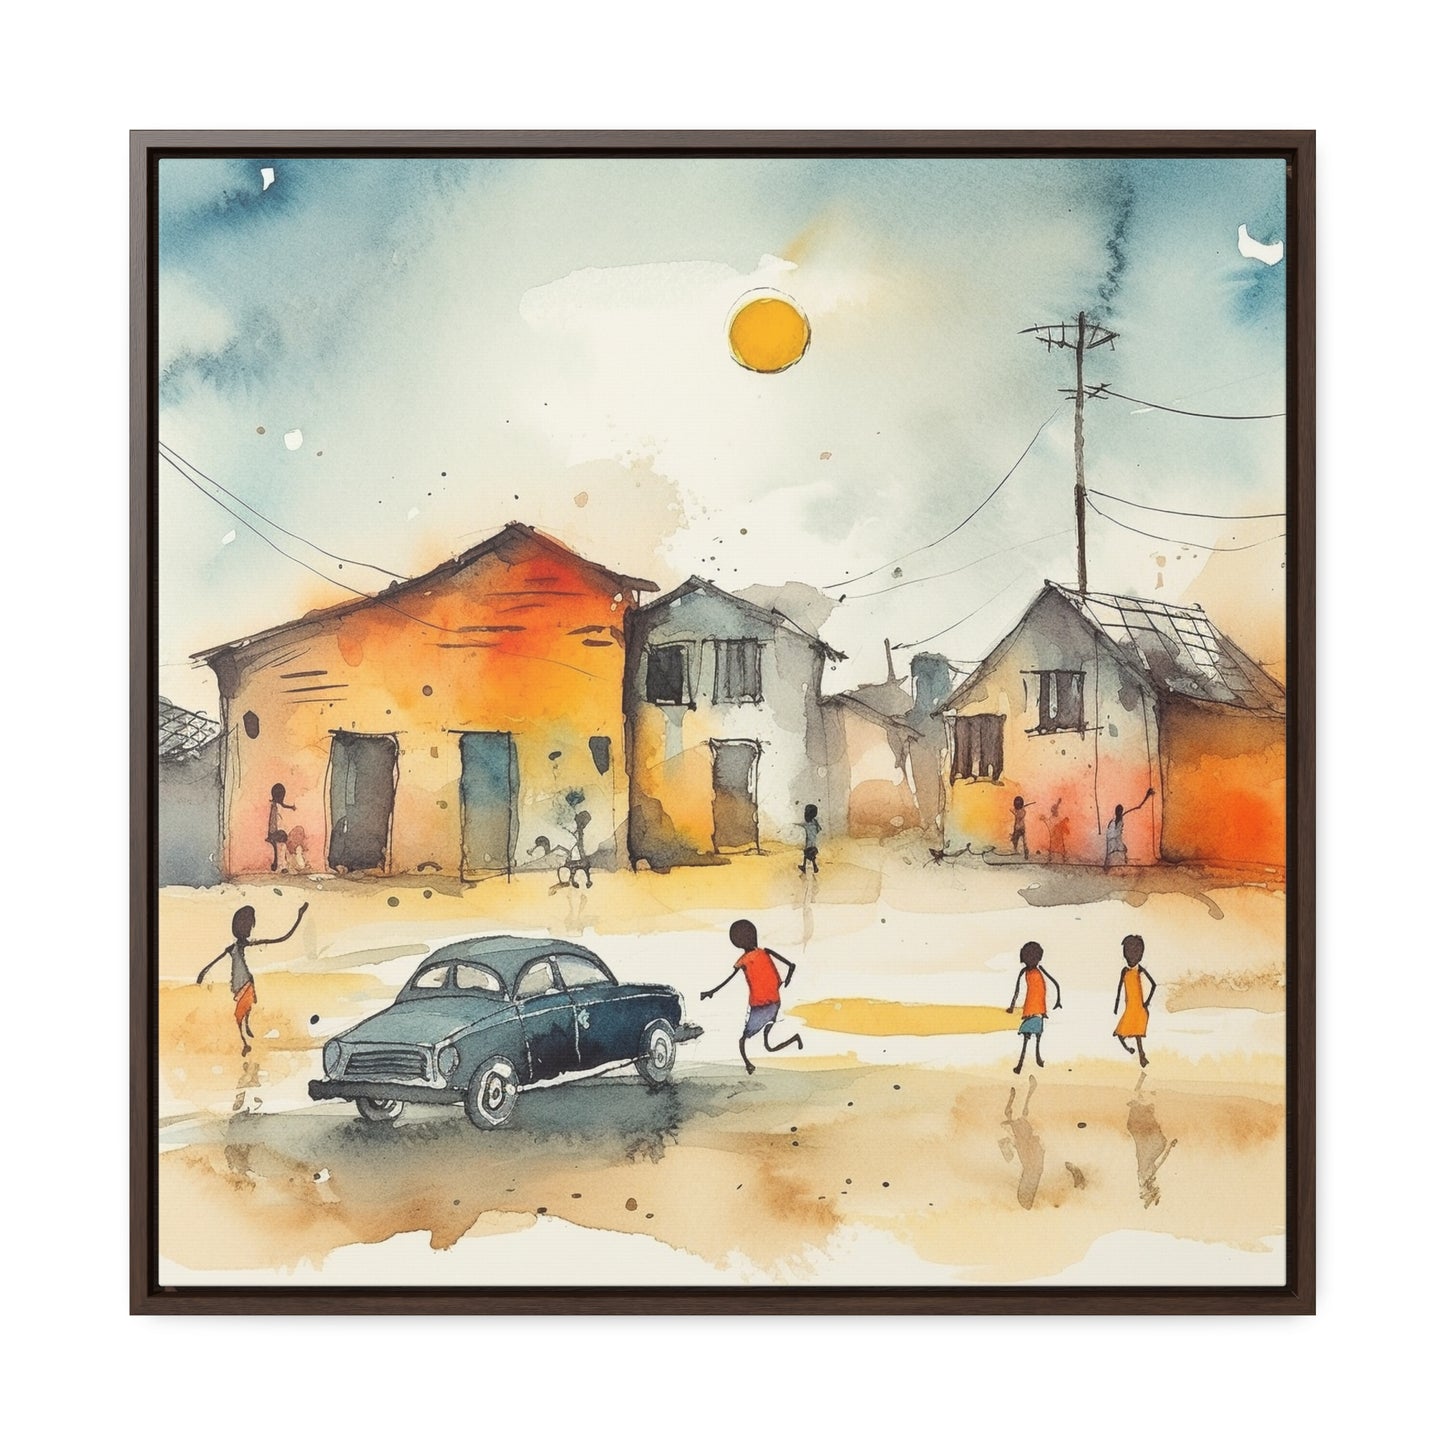 Childhood 13, Valentinii, Gallery Canvas Wraps, Square Frame